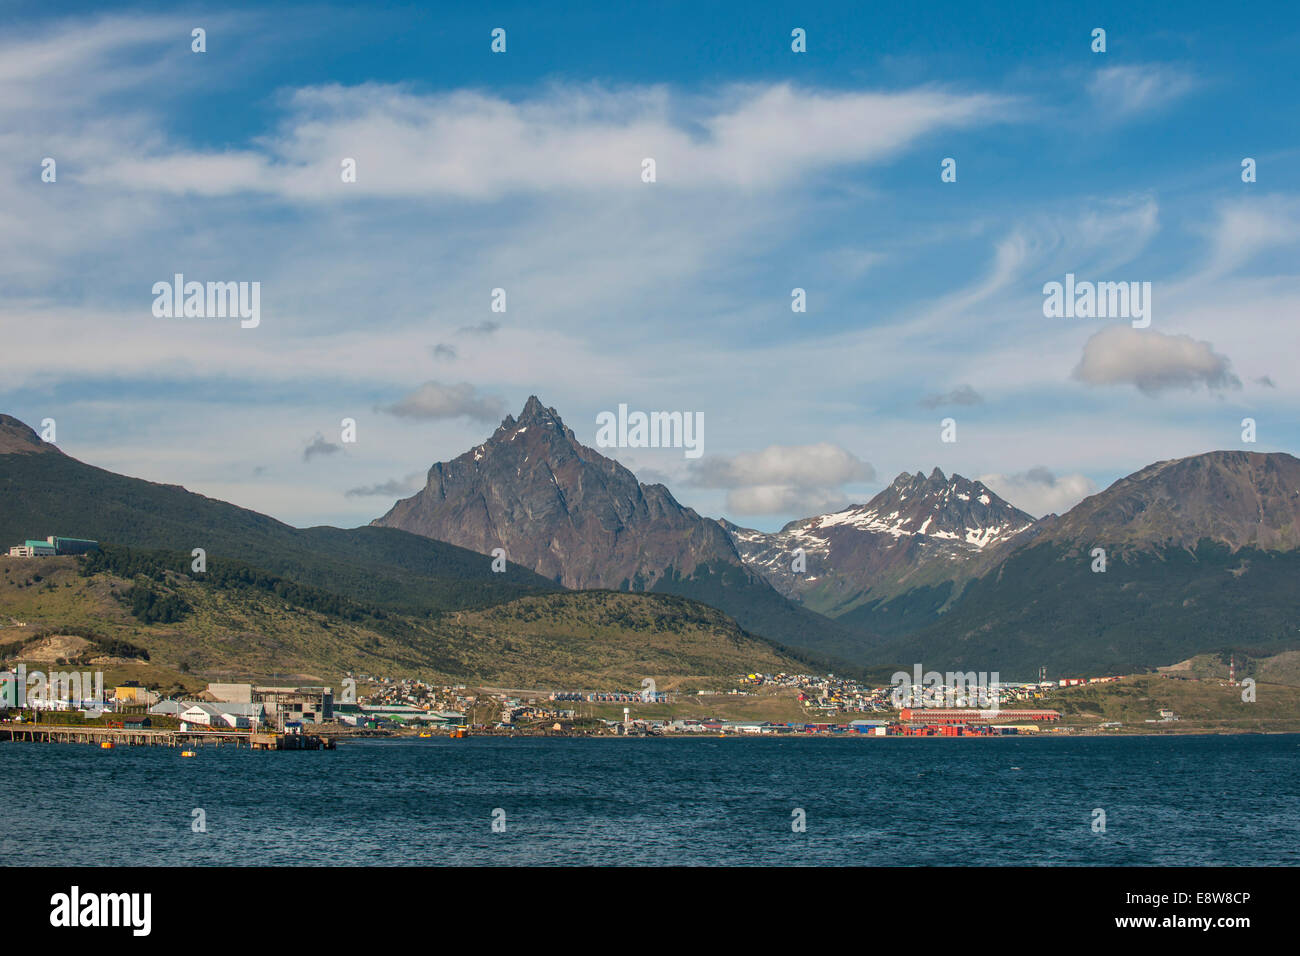 Andes mountains near Ushuaia, Tierra del Fuego Province, Argentina Stock Photo